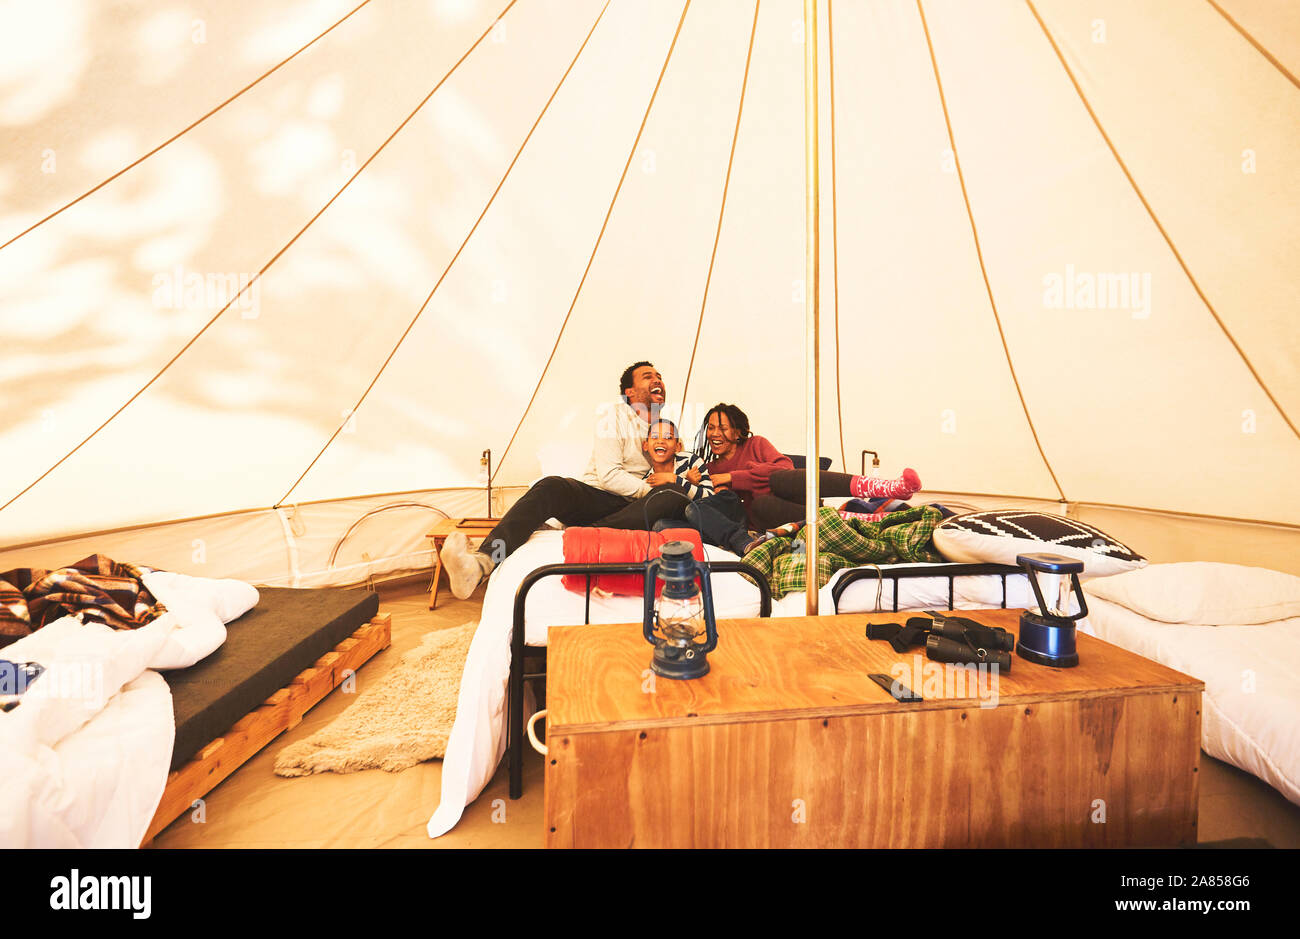 Happy, carefree family relaxing on bed in camping yurt Stock Photo